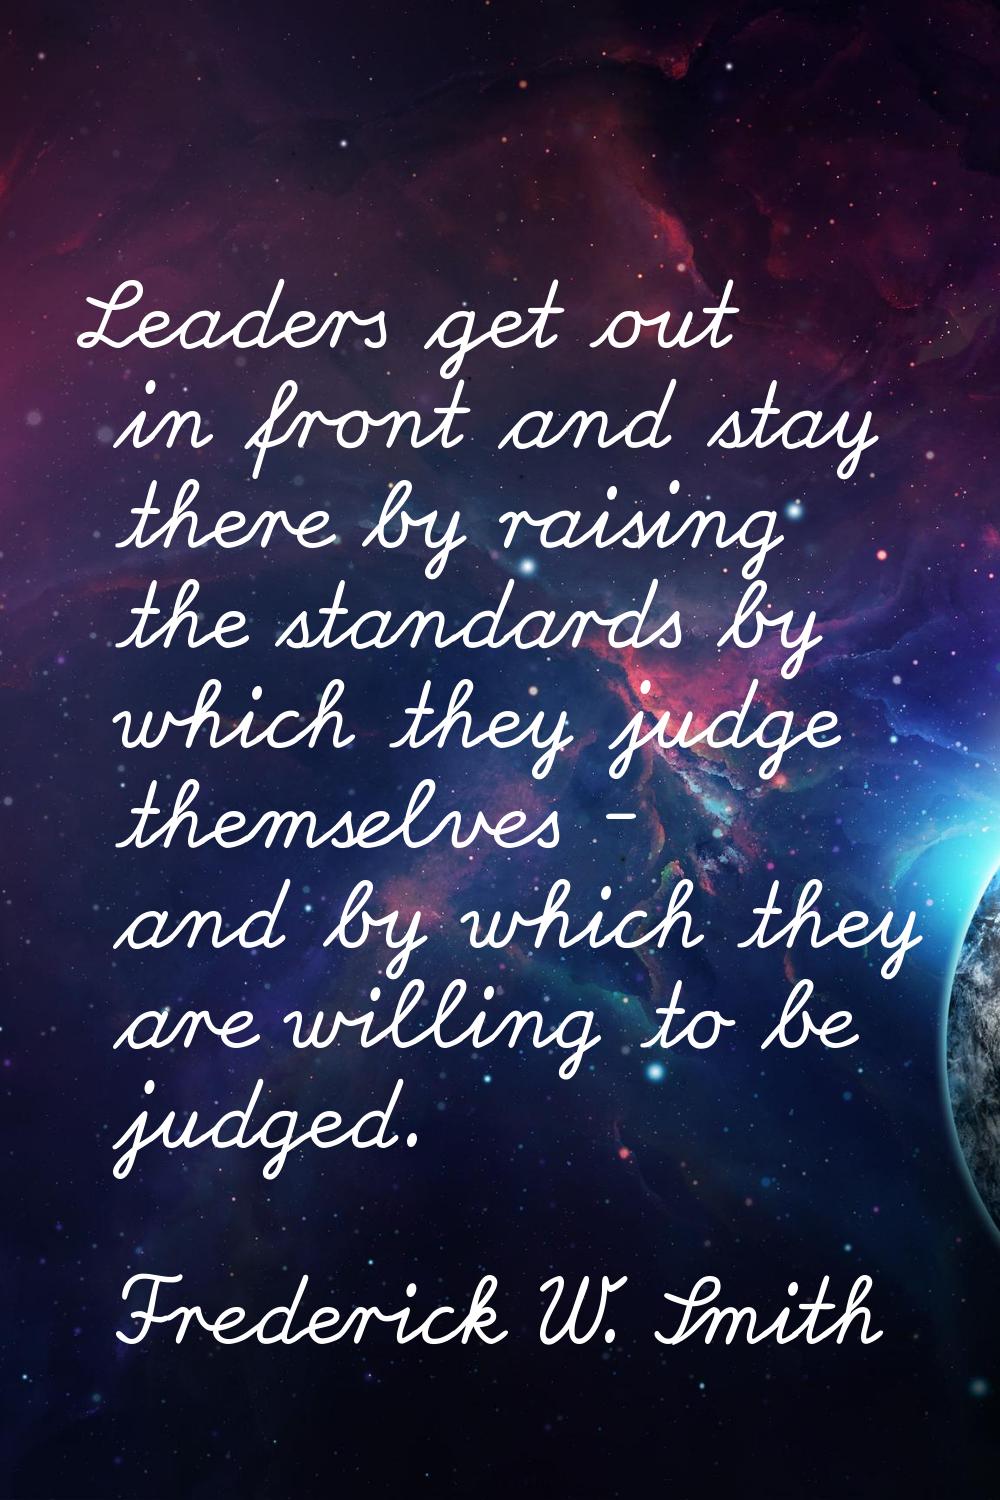 Leaders get out in front and stay there by raising the standards by which they judge themselves - a